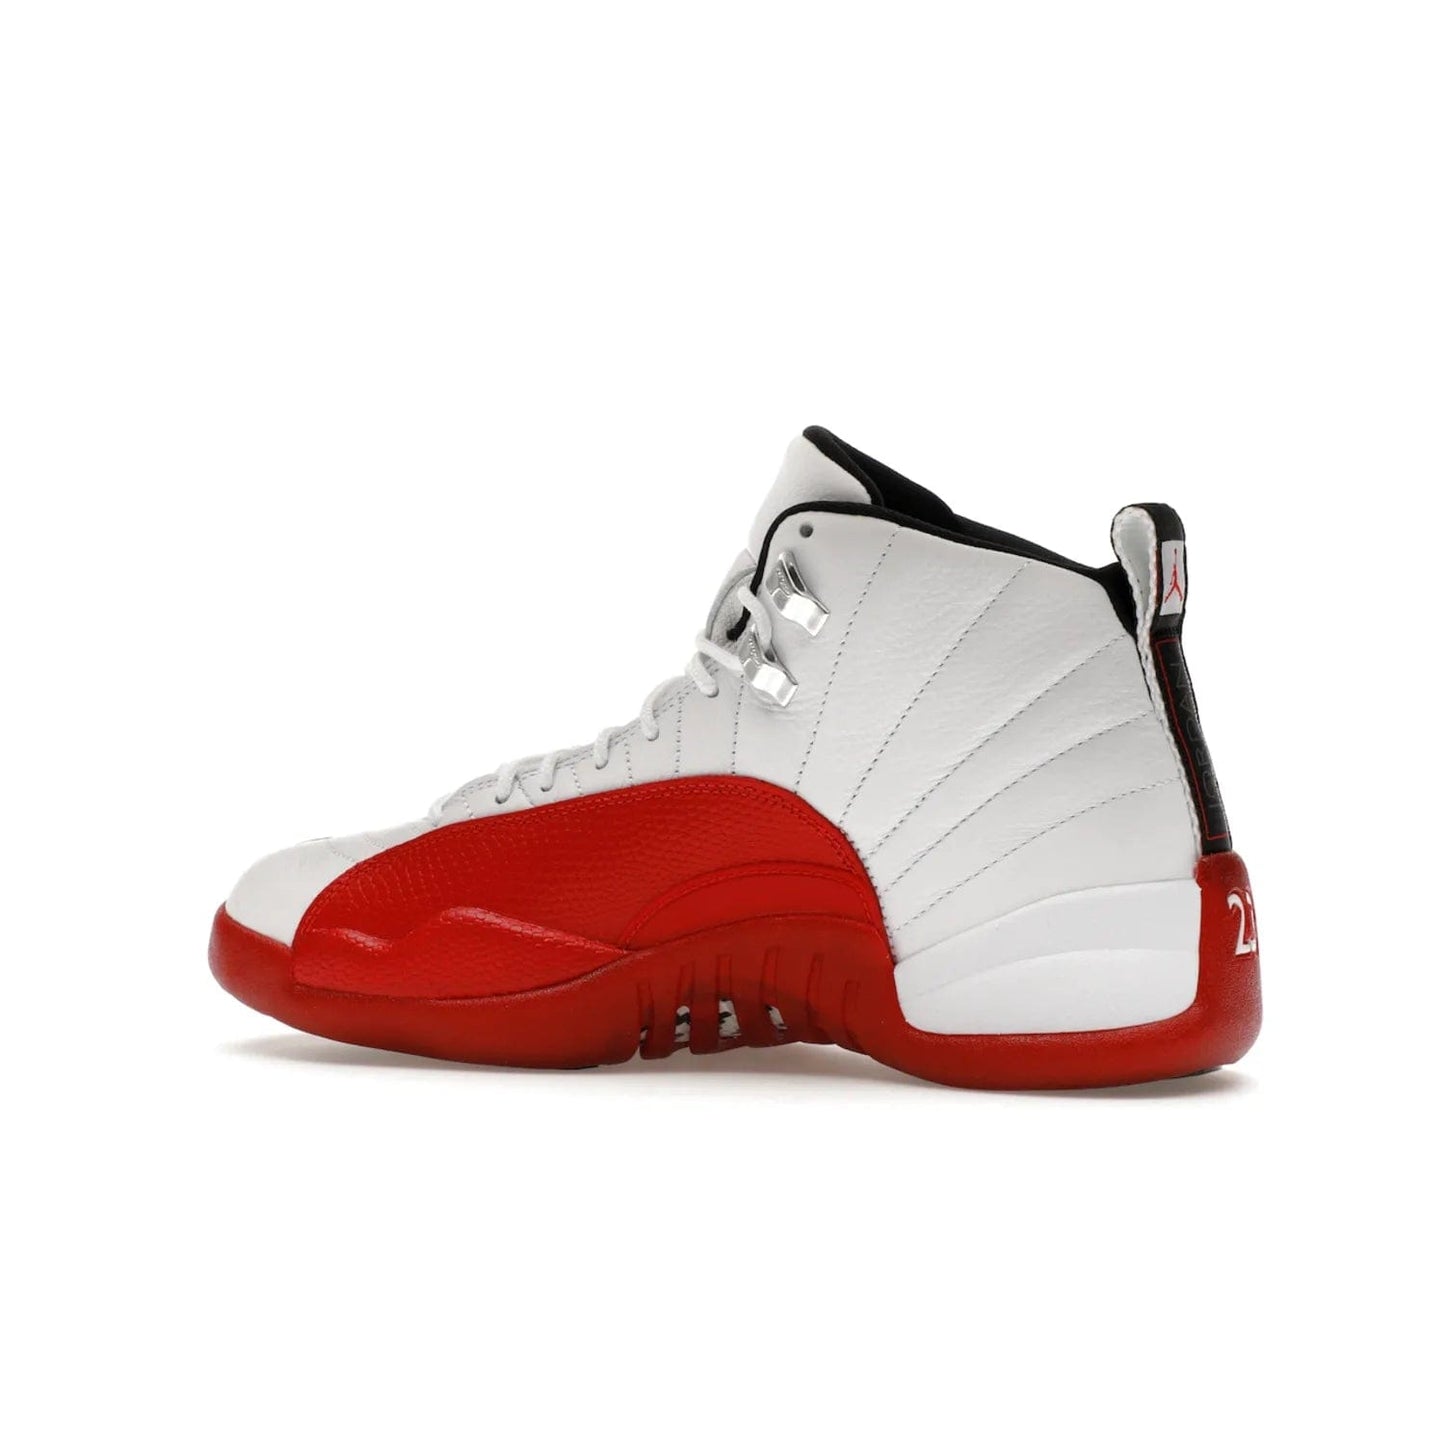 Jordan 12 Retro Cherry (2023) - Image 21 - Only at www.BallersClubKickz.com - Live your sneaker legend with the Jordan 12 Retro Cherry. Iconic pebbled leather mudguards, quilted uppers, and varsity red accents make this 1997 classic a must-have for 2023. Shine on with silver hardware and matching midsoles, and bring it all together for limited-edition style on October 28th. Step into Jordan legacy with the Retro Cherry.